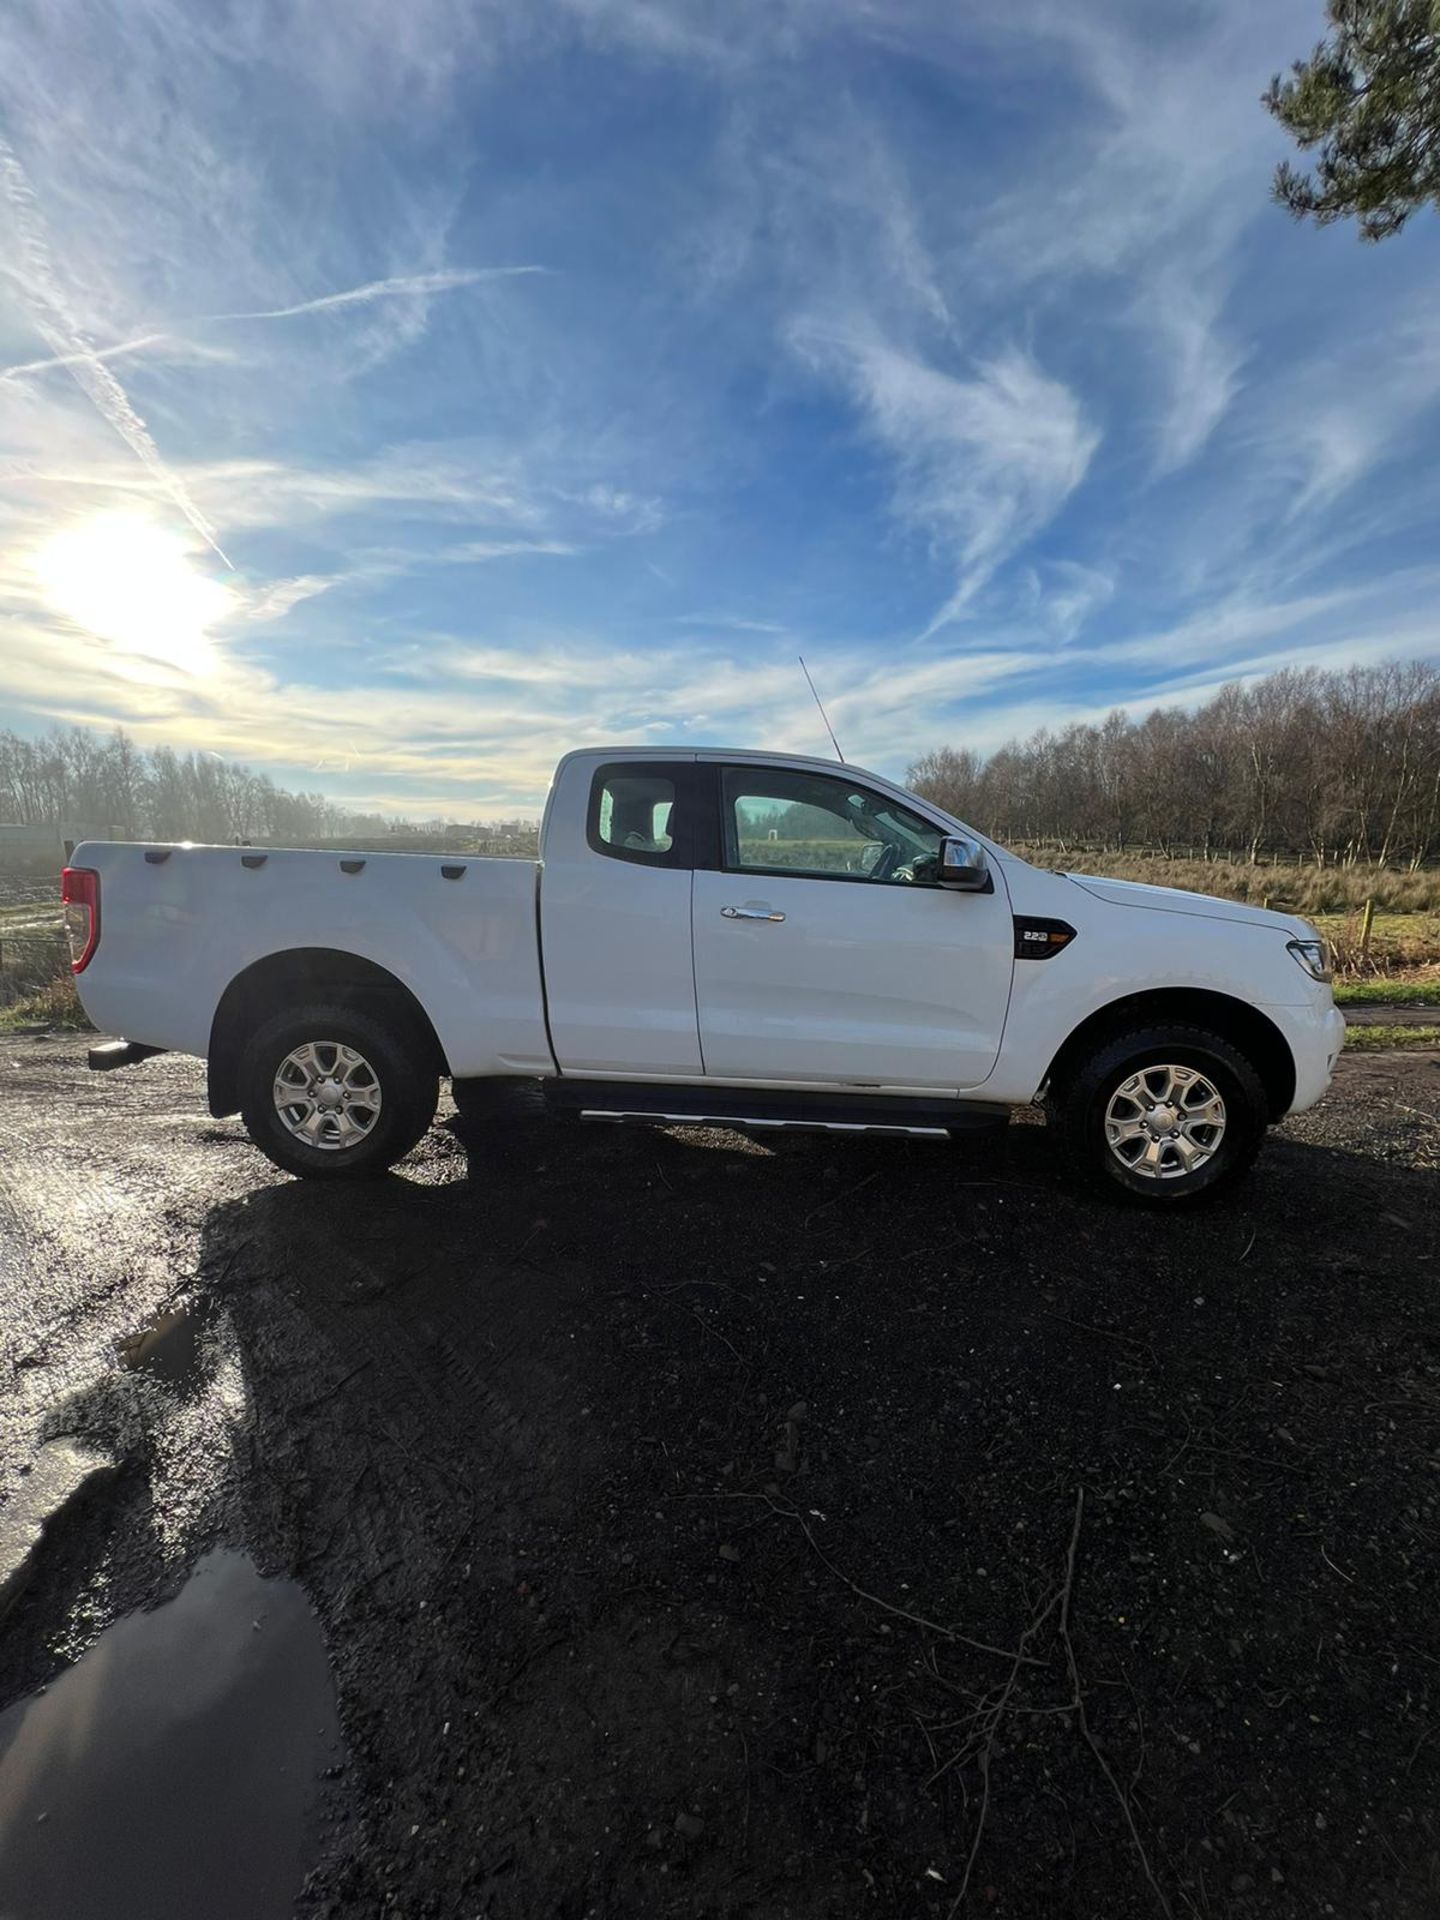 2017 FORD RANGER KING CAB EXSTRA CAB CAB AND HALF - Image 4 of 19